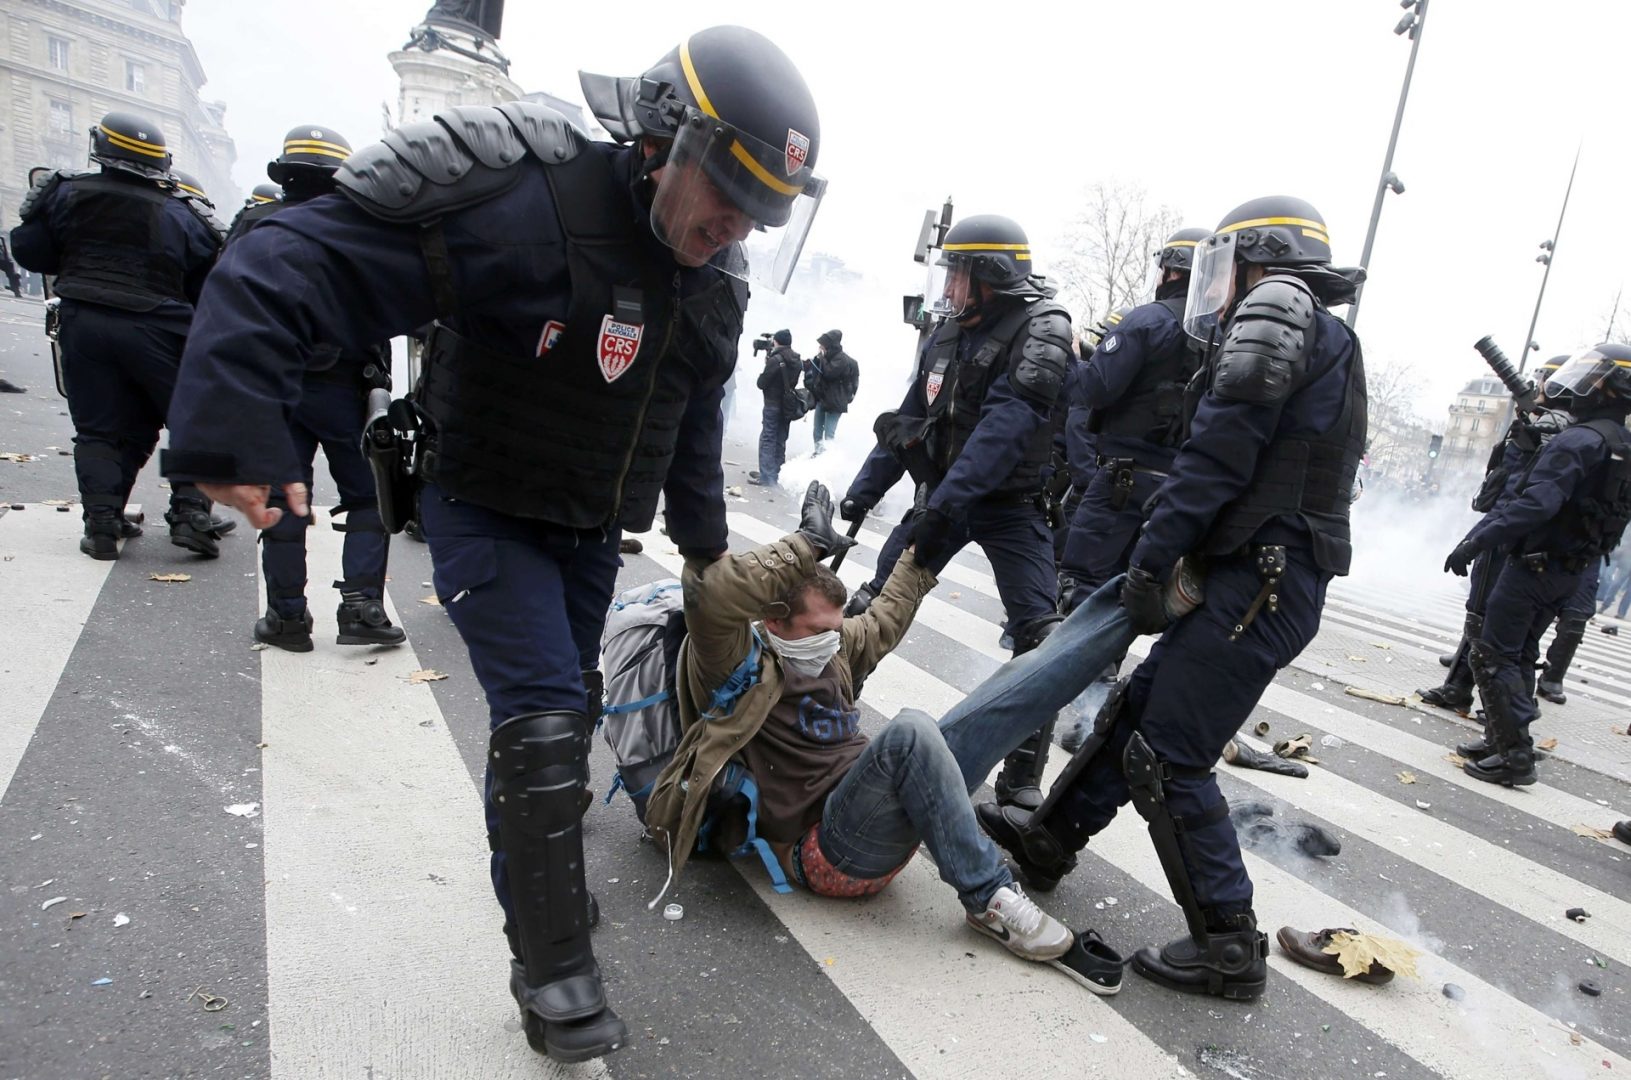 French CRS riot police apprehend a demonstrator during clashes near the Place de la Republique after the cancellation of a planned climate march following shootings in the French capital, ahead of the World Climate Change Conference 2015 (COP21), in Paris, France, November 29, 2015.          REUTERS/Eric Gaillard   TPX IMAGES OF THE DAY